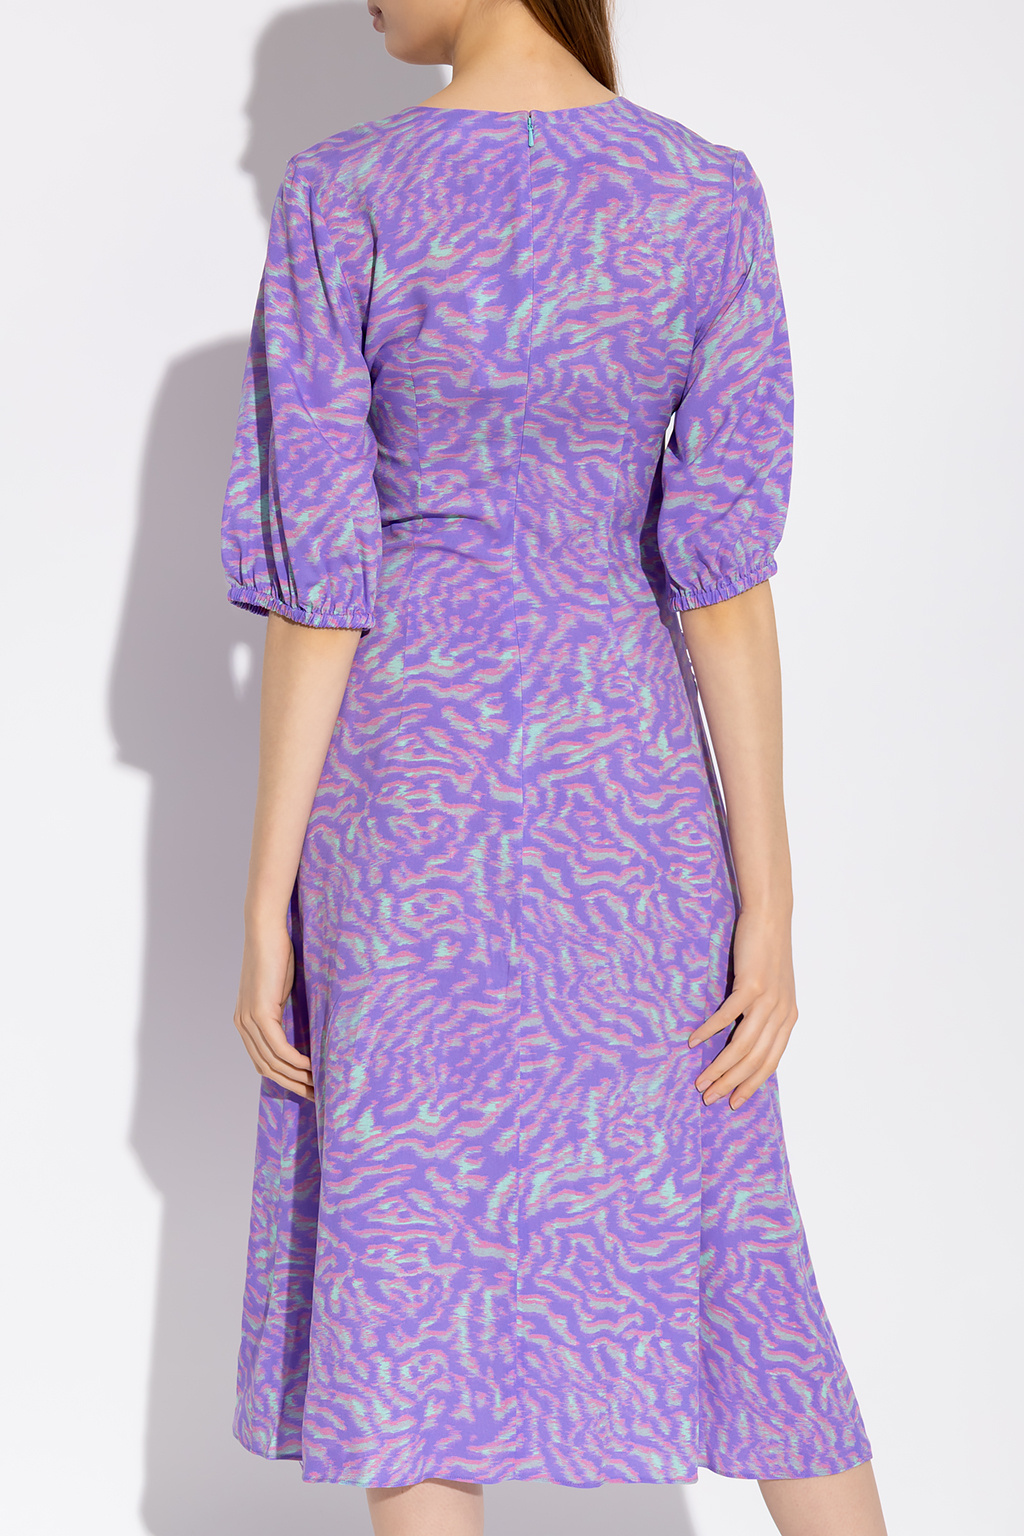 PS Paul Smith Patterned high dress